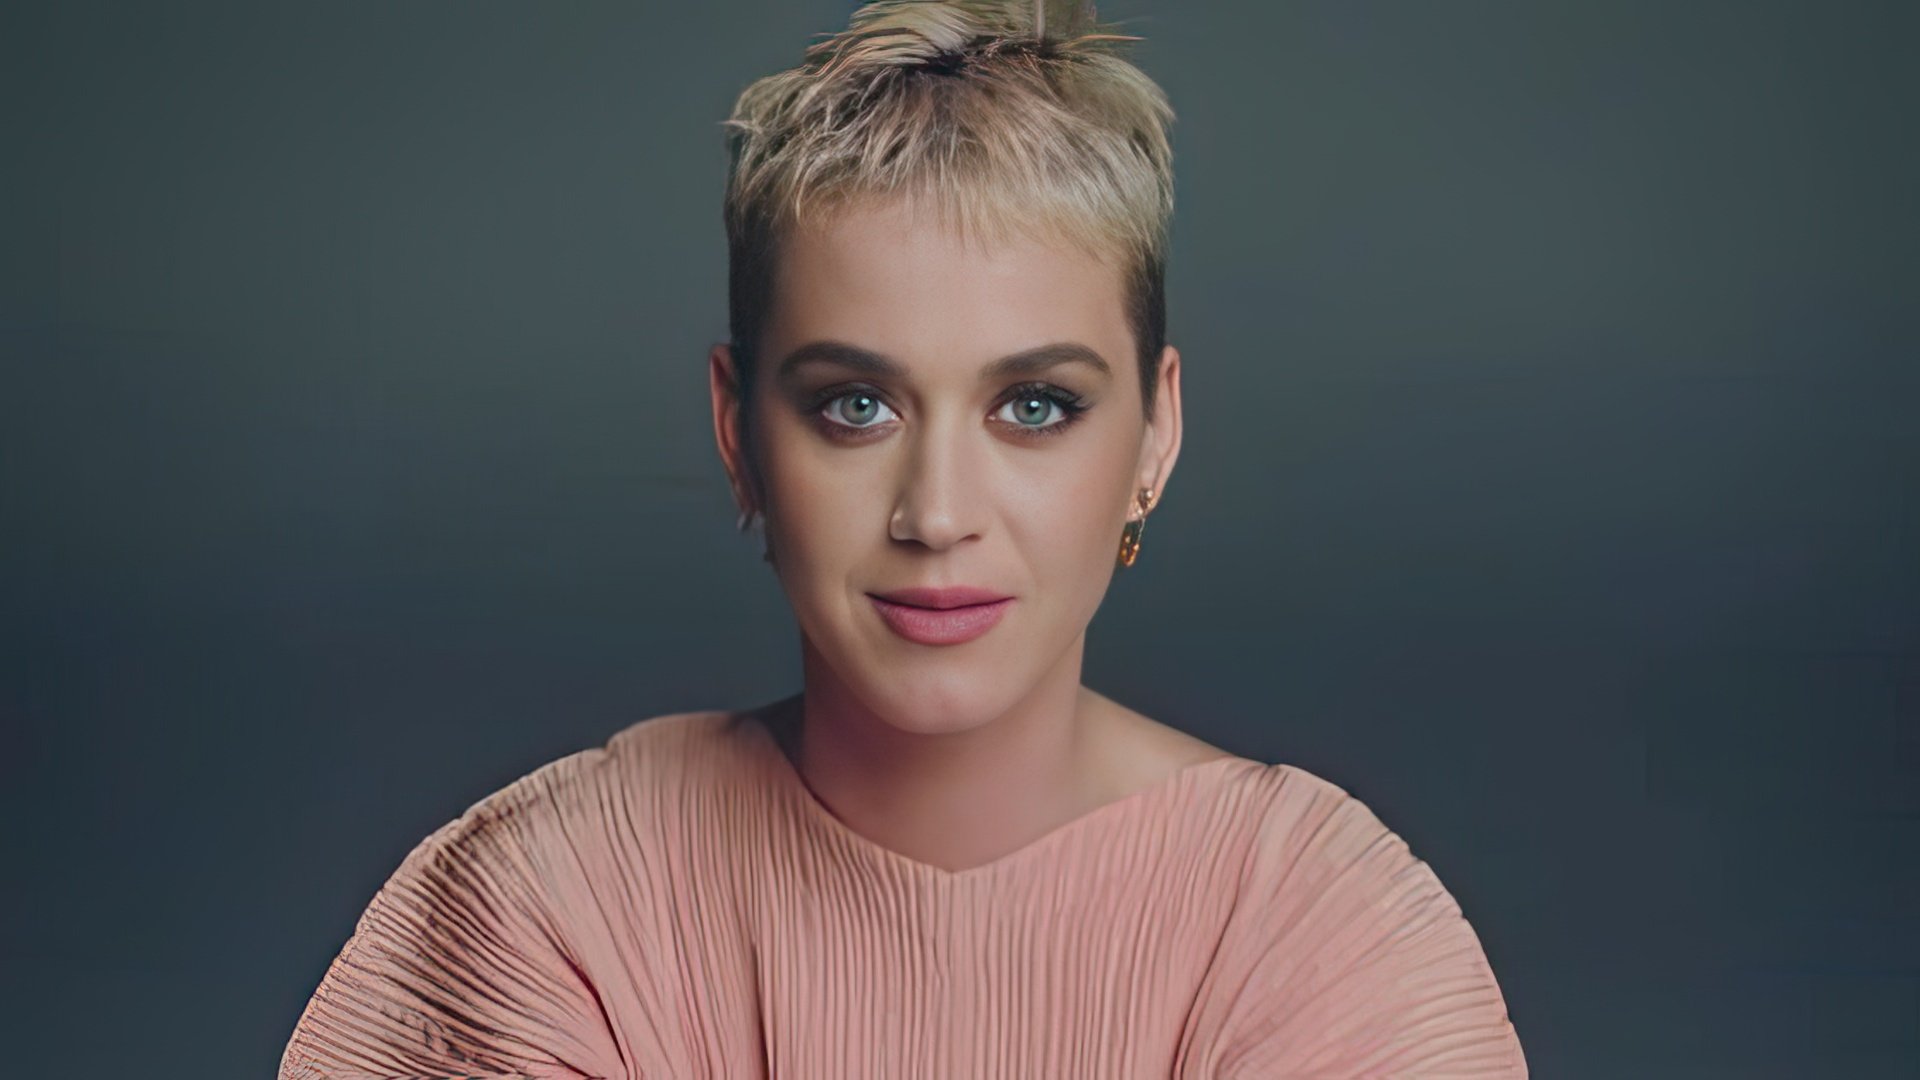 Before the release of the new album, Katy Perry changed her image